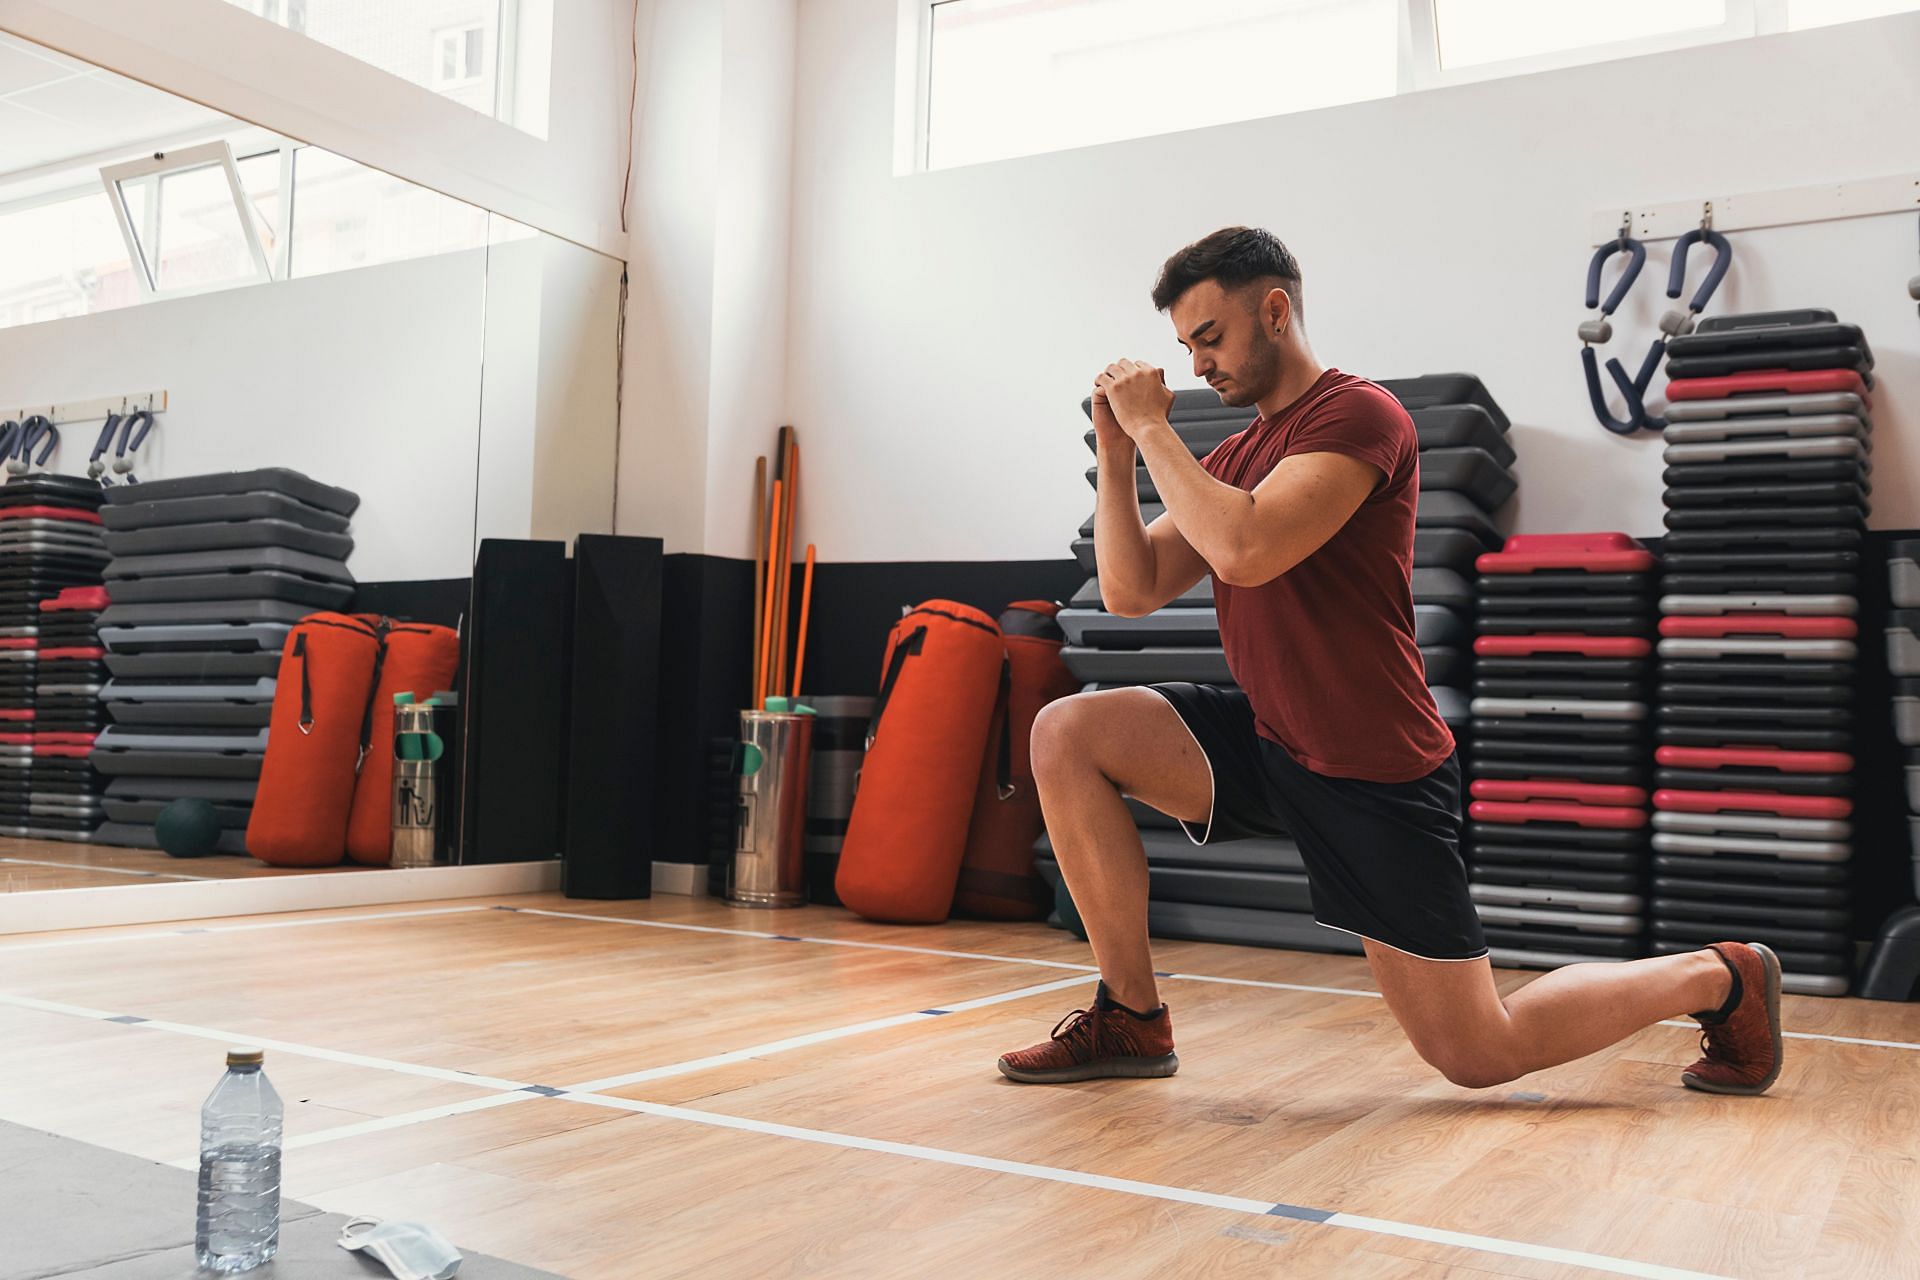 Seated ab exercise is a great way to firm up your middle and improve your overall core strength. (Image via Unsplash/ Sergio Carpintero)